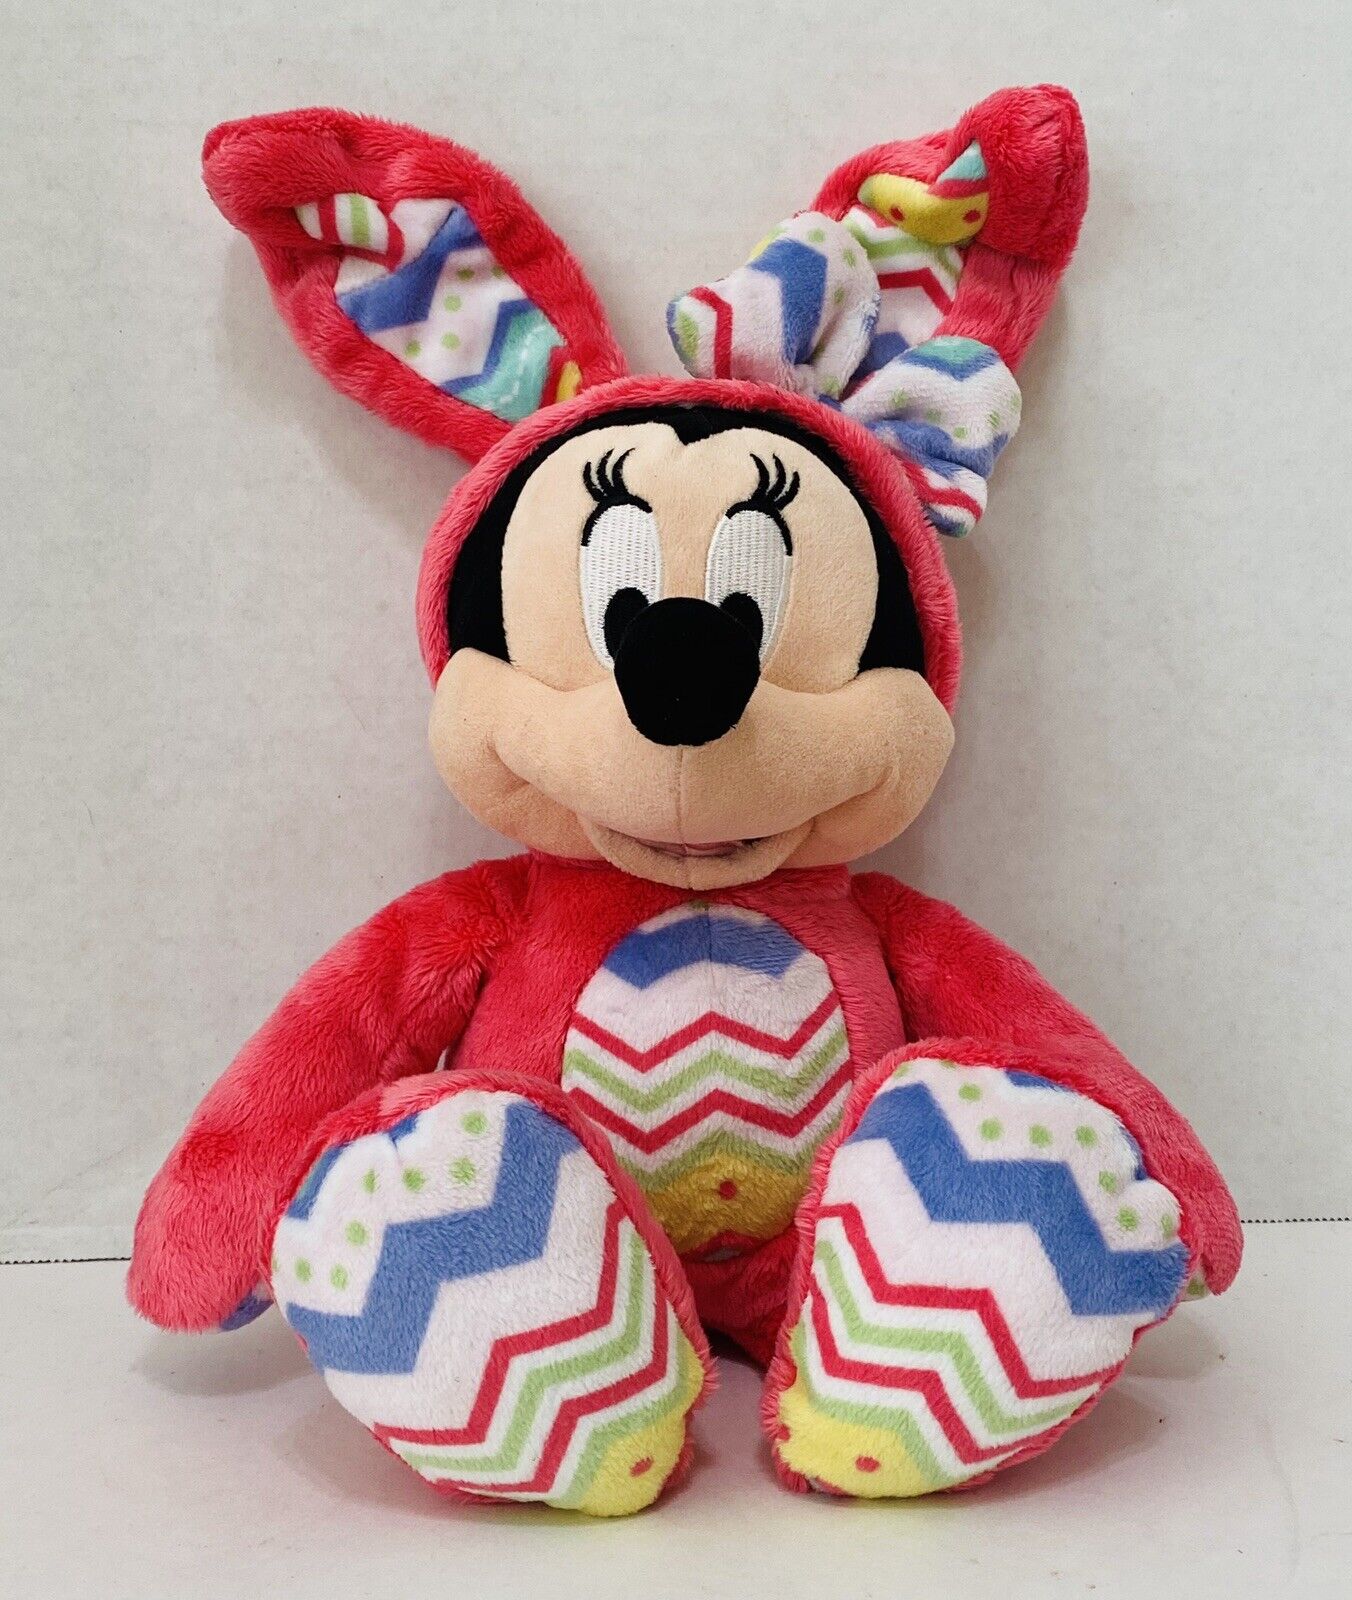 Disney Store Minnie Plush In Pink Easter Bunny Outfit Very Soft